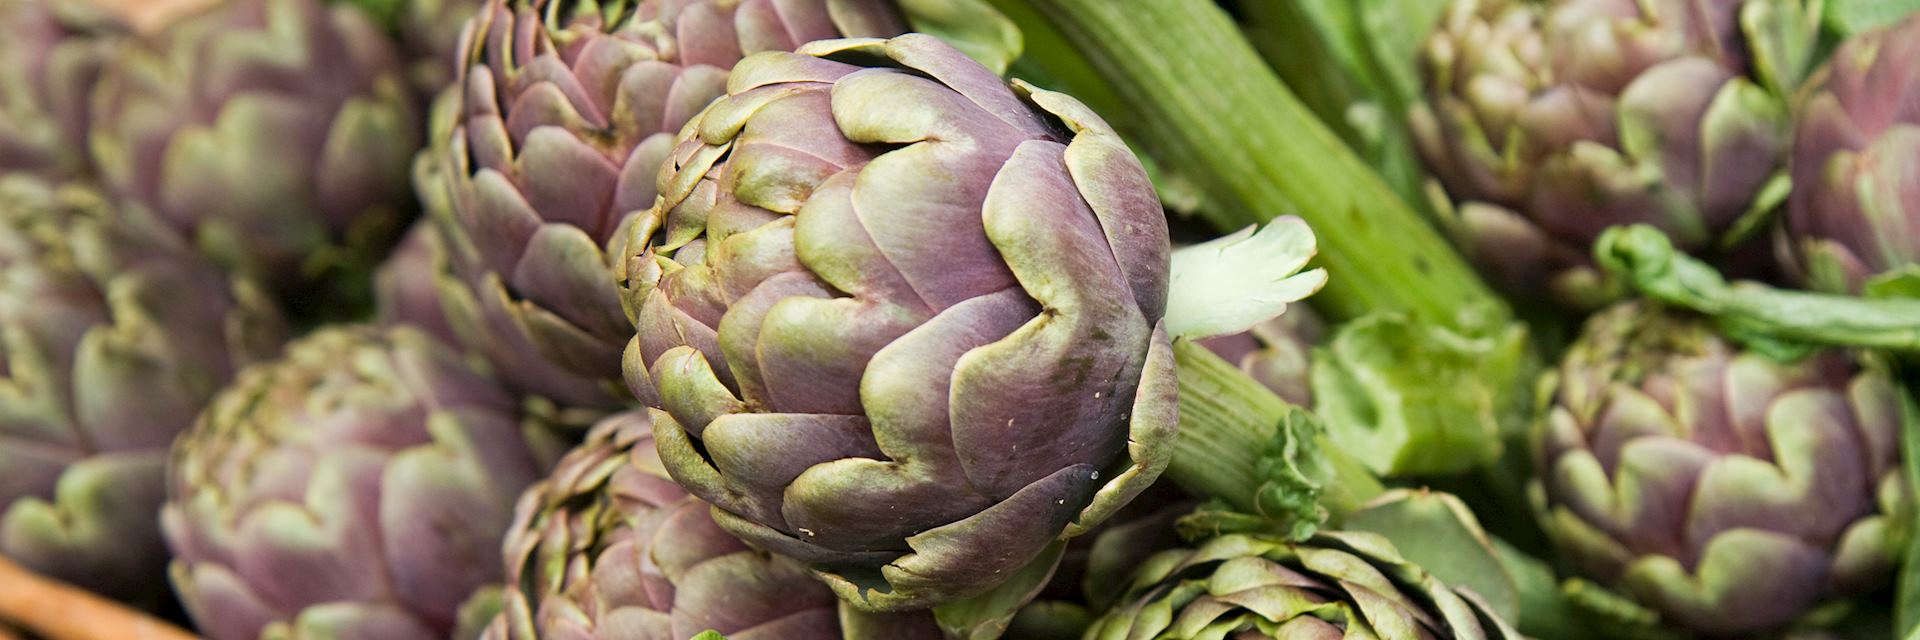 Artichokes at a market stall in Rome 